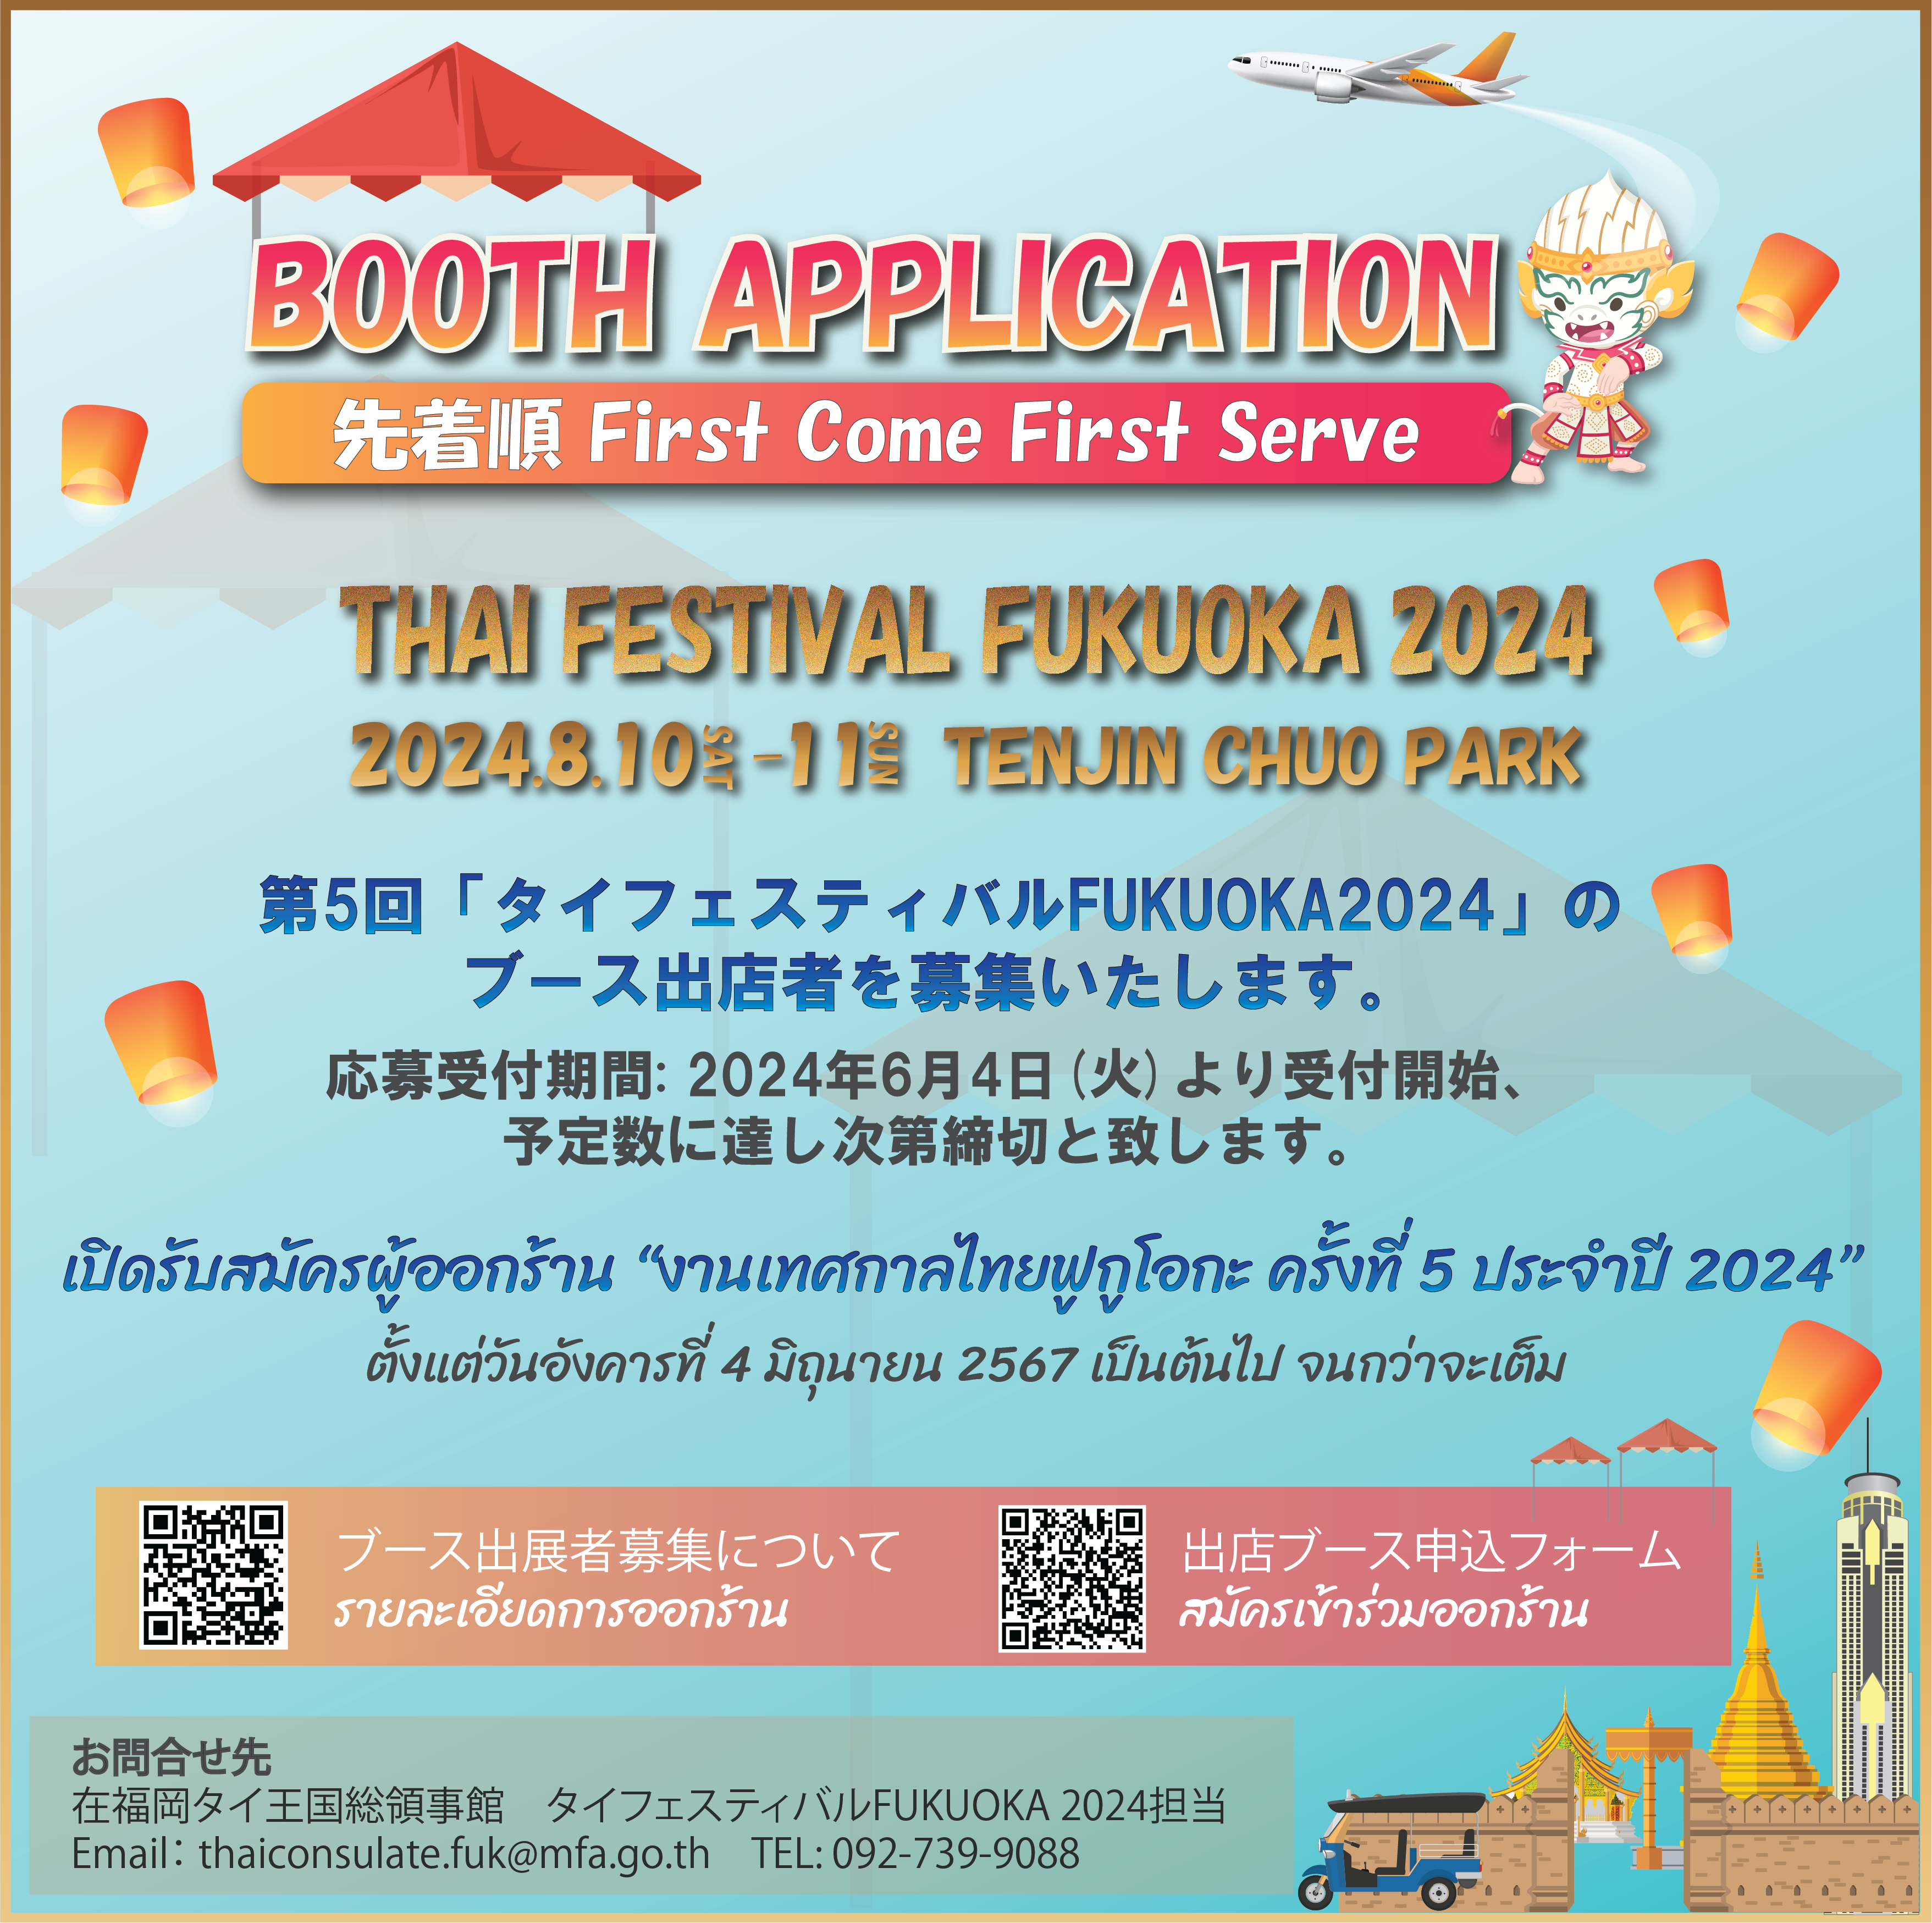 TFF_2024_Booth_Application_AN_1